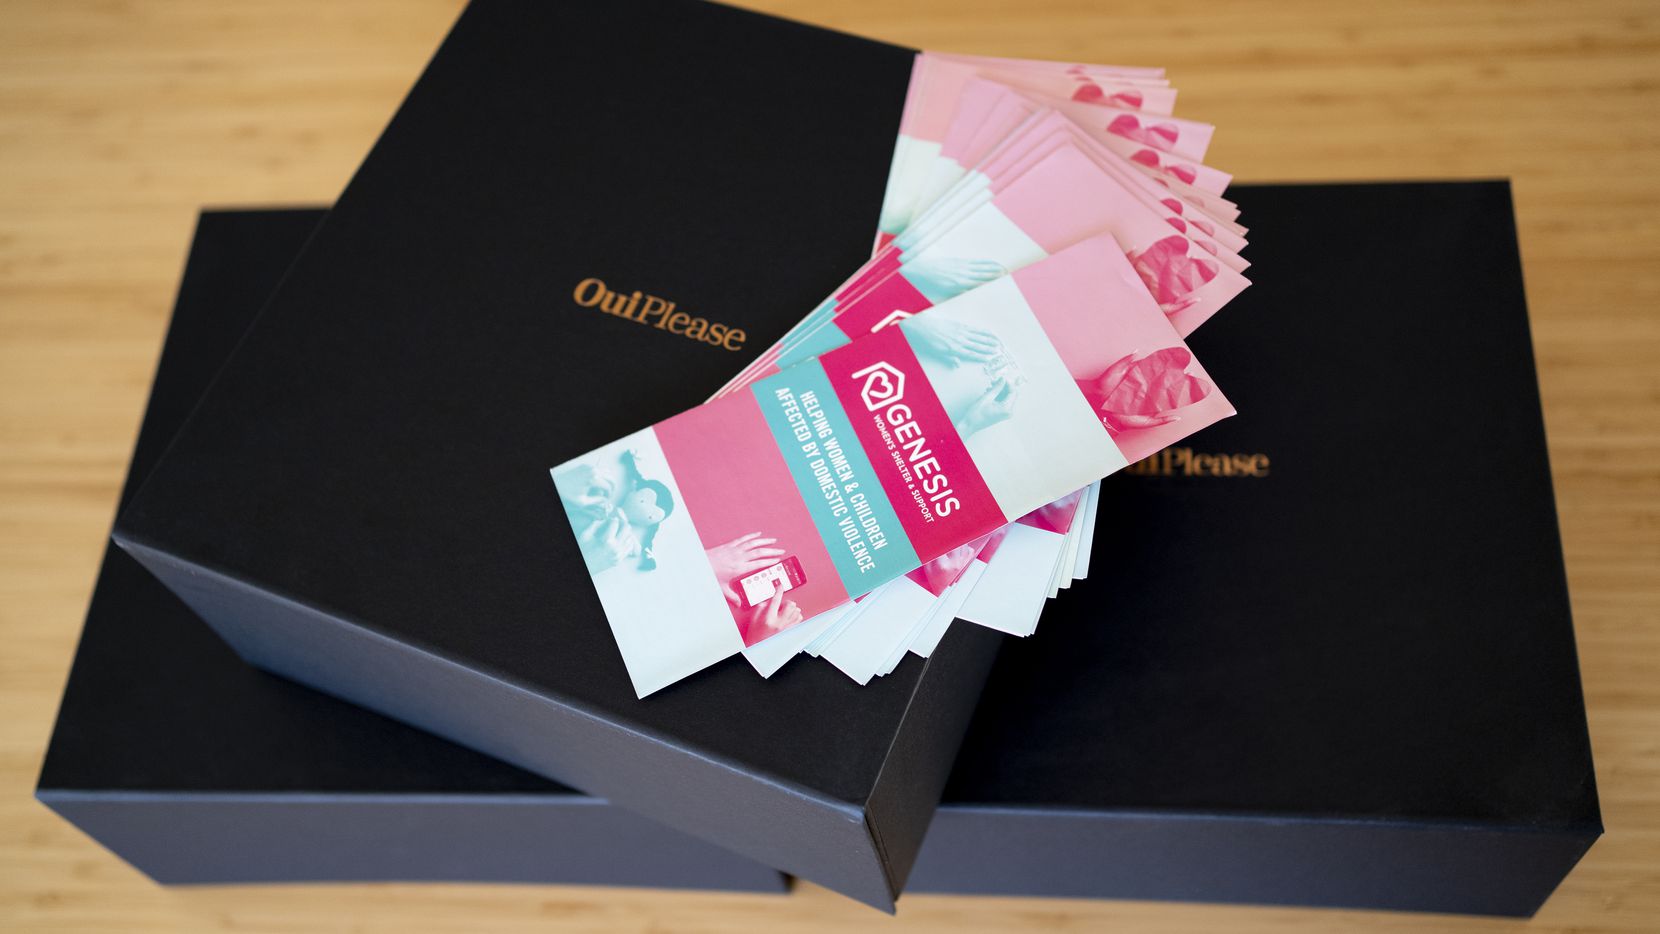 OuiPlease is a luxury subscription service that encourages customers to reuse their boxes to...